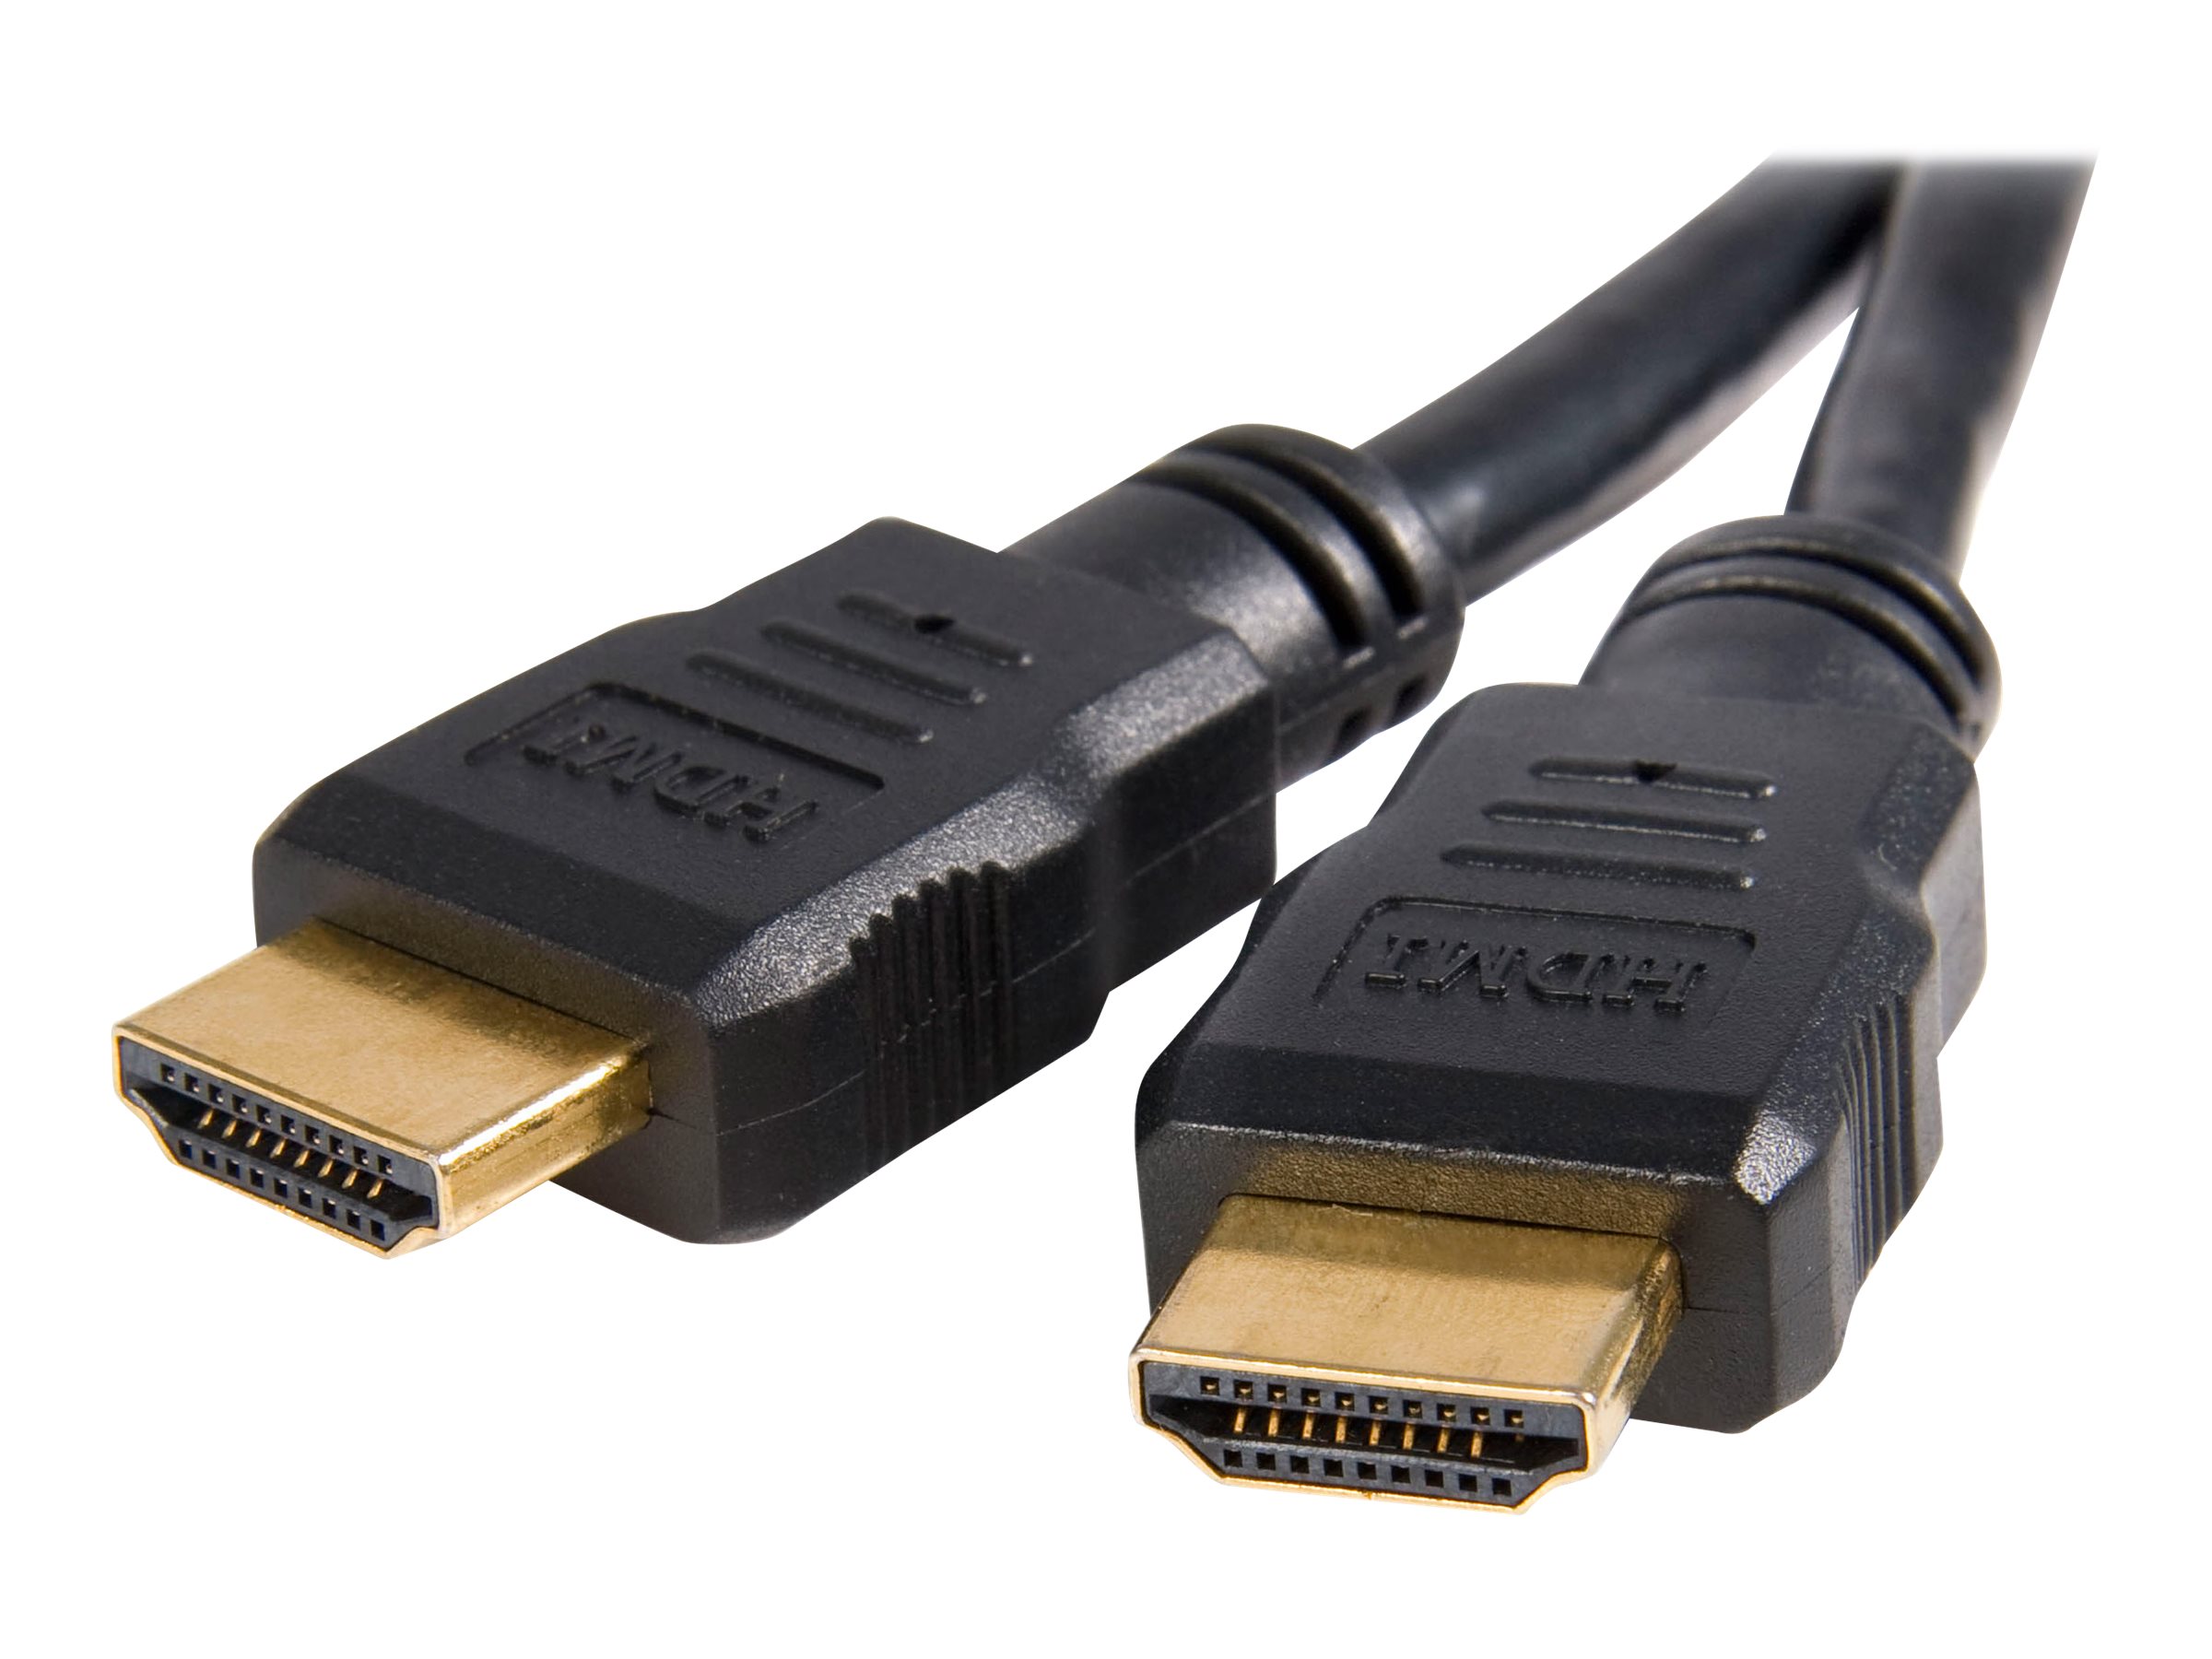 CABLE HDMI STARTECH HDMM25 NEGRO 7 6 METROS